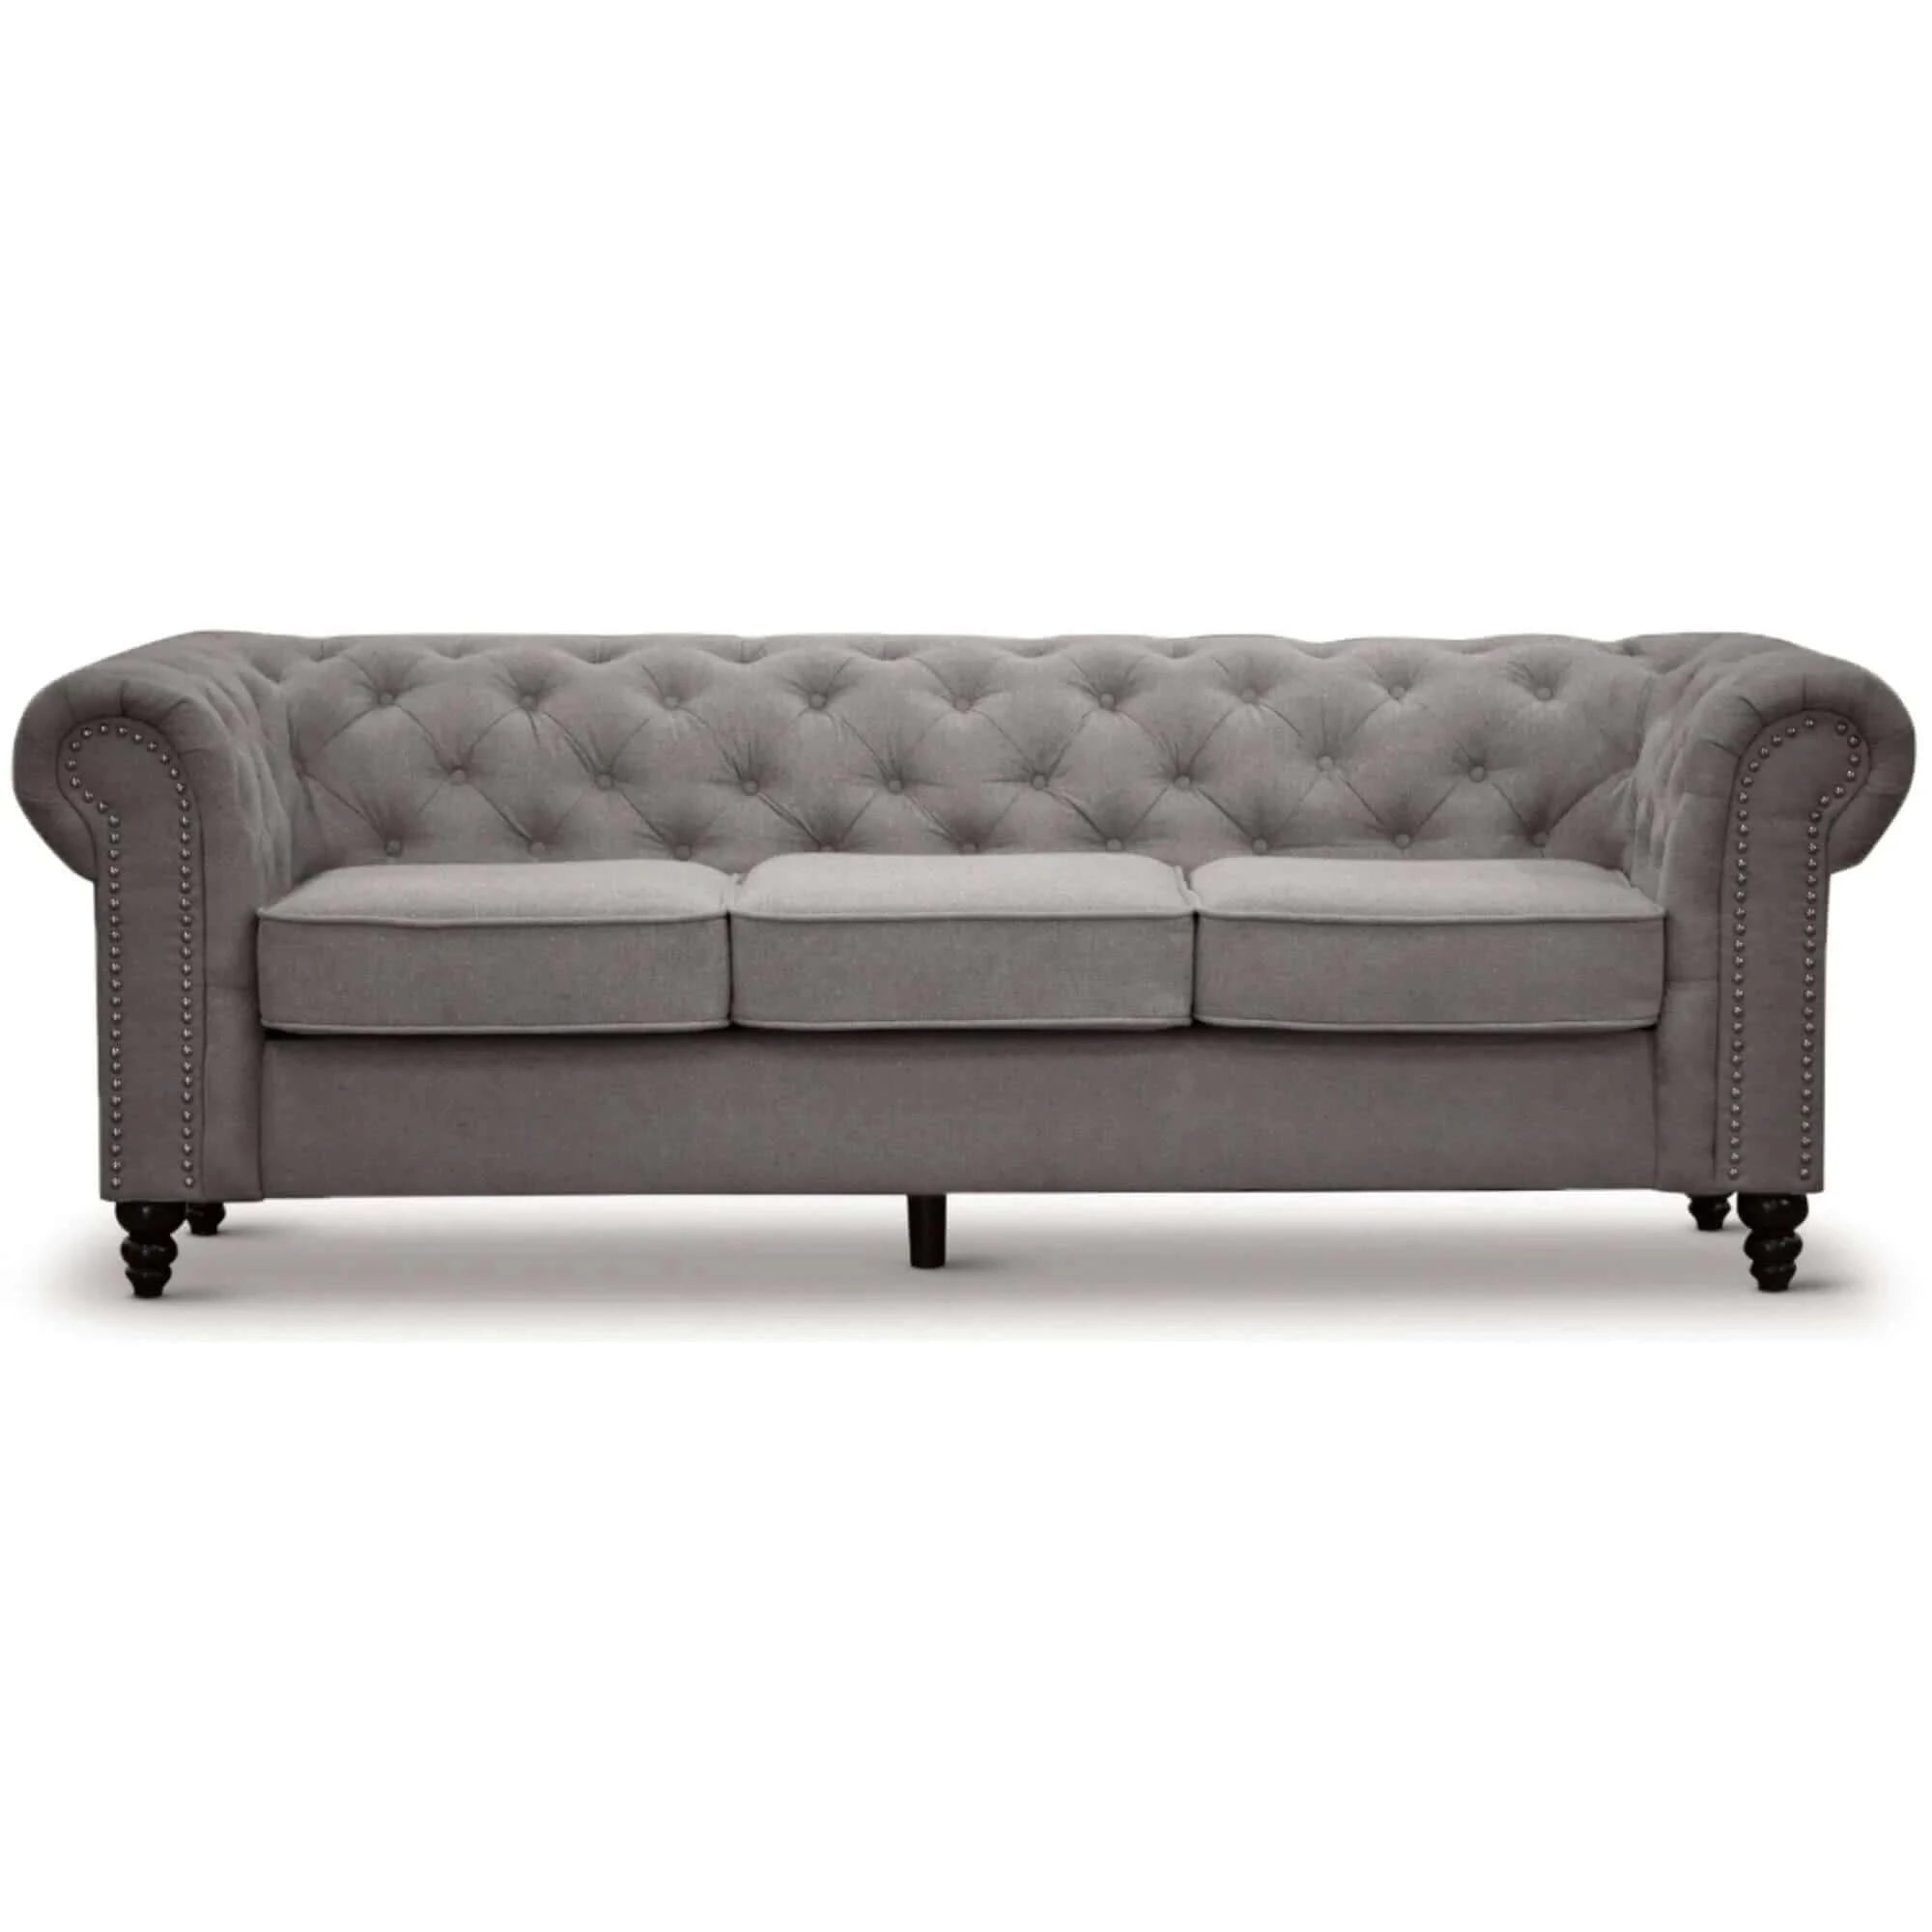 Buy mellowly 3 + 2 seater sofa fabric uplholstered chesterfield lounge couch - grey - upinteriors-Upinteriors